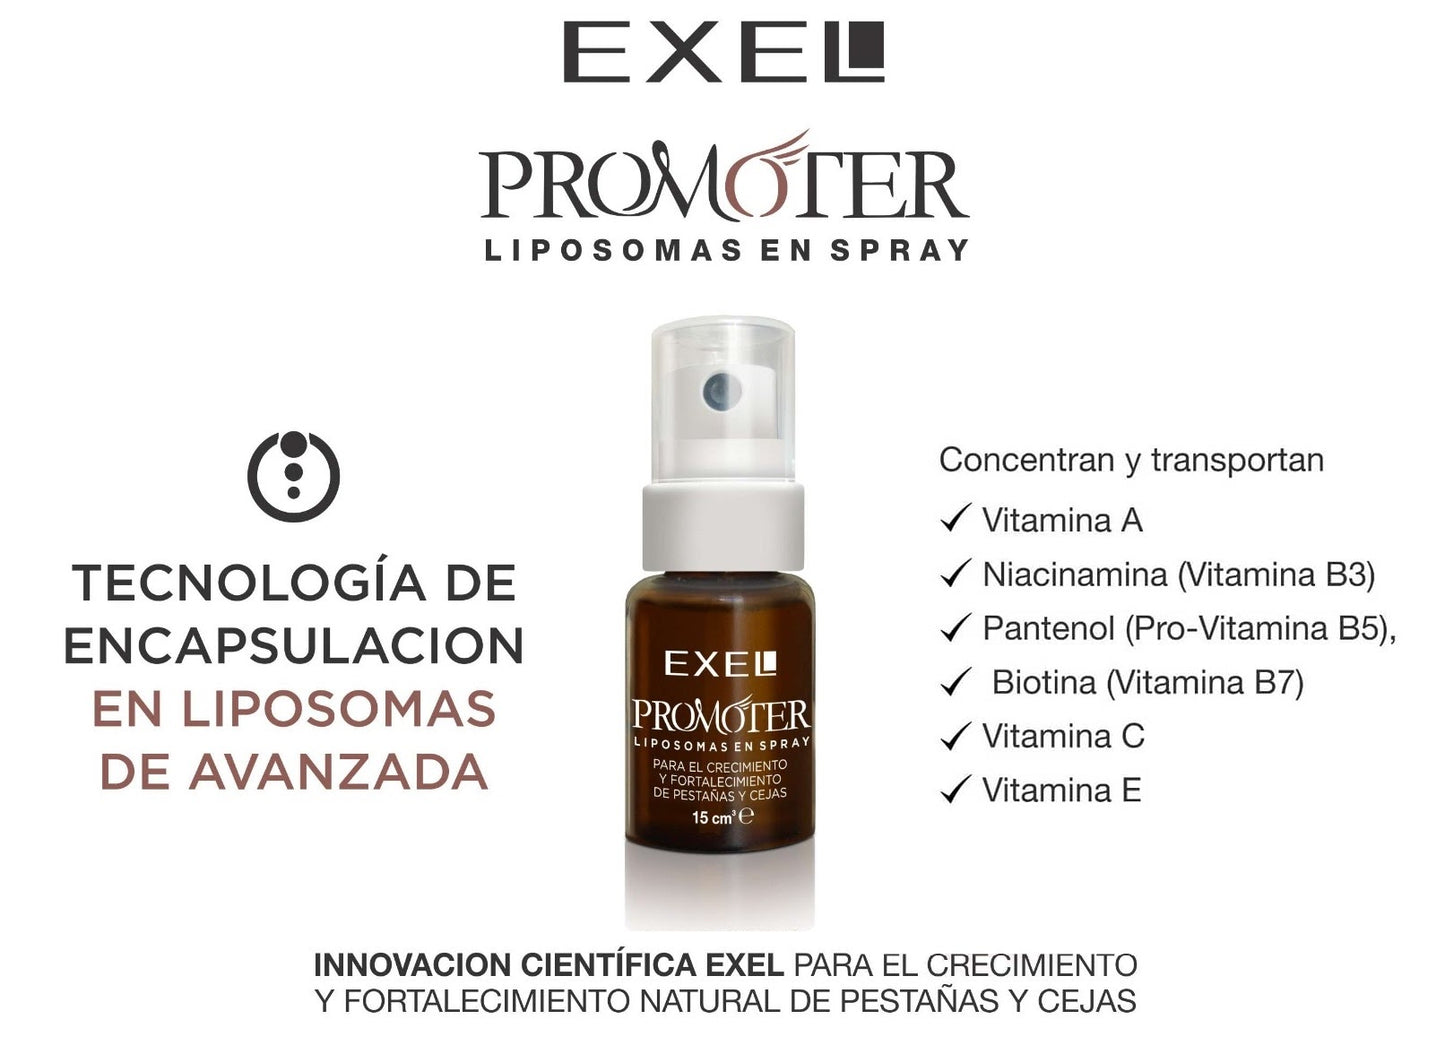 Exel Promoter